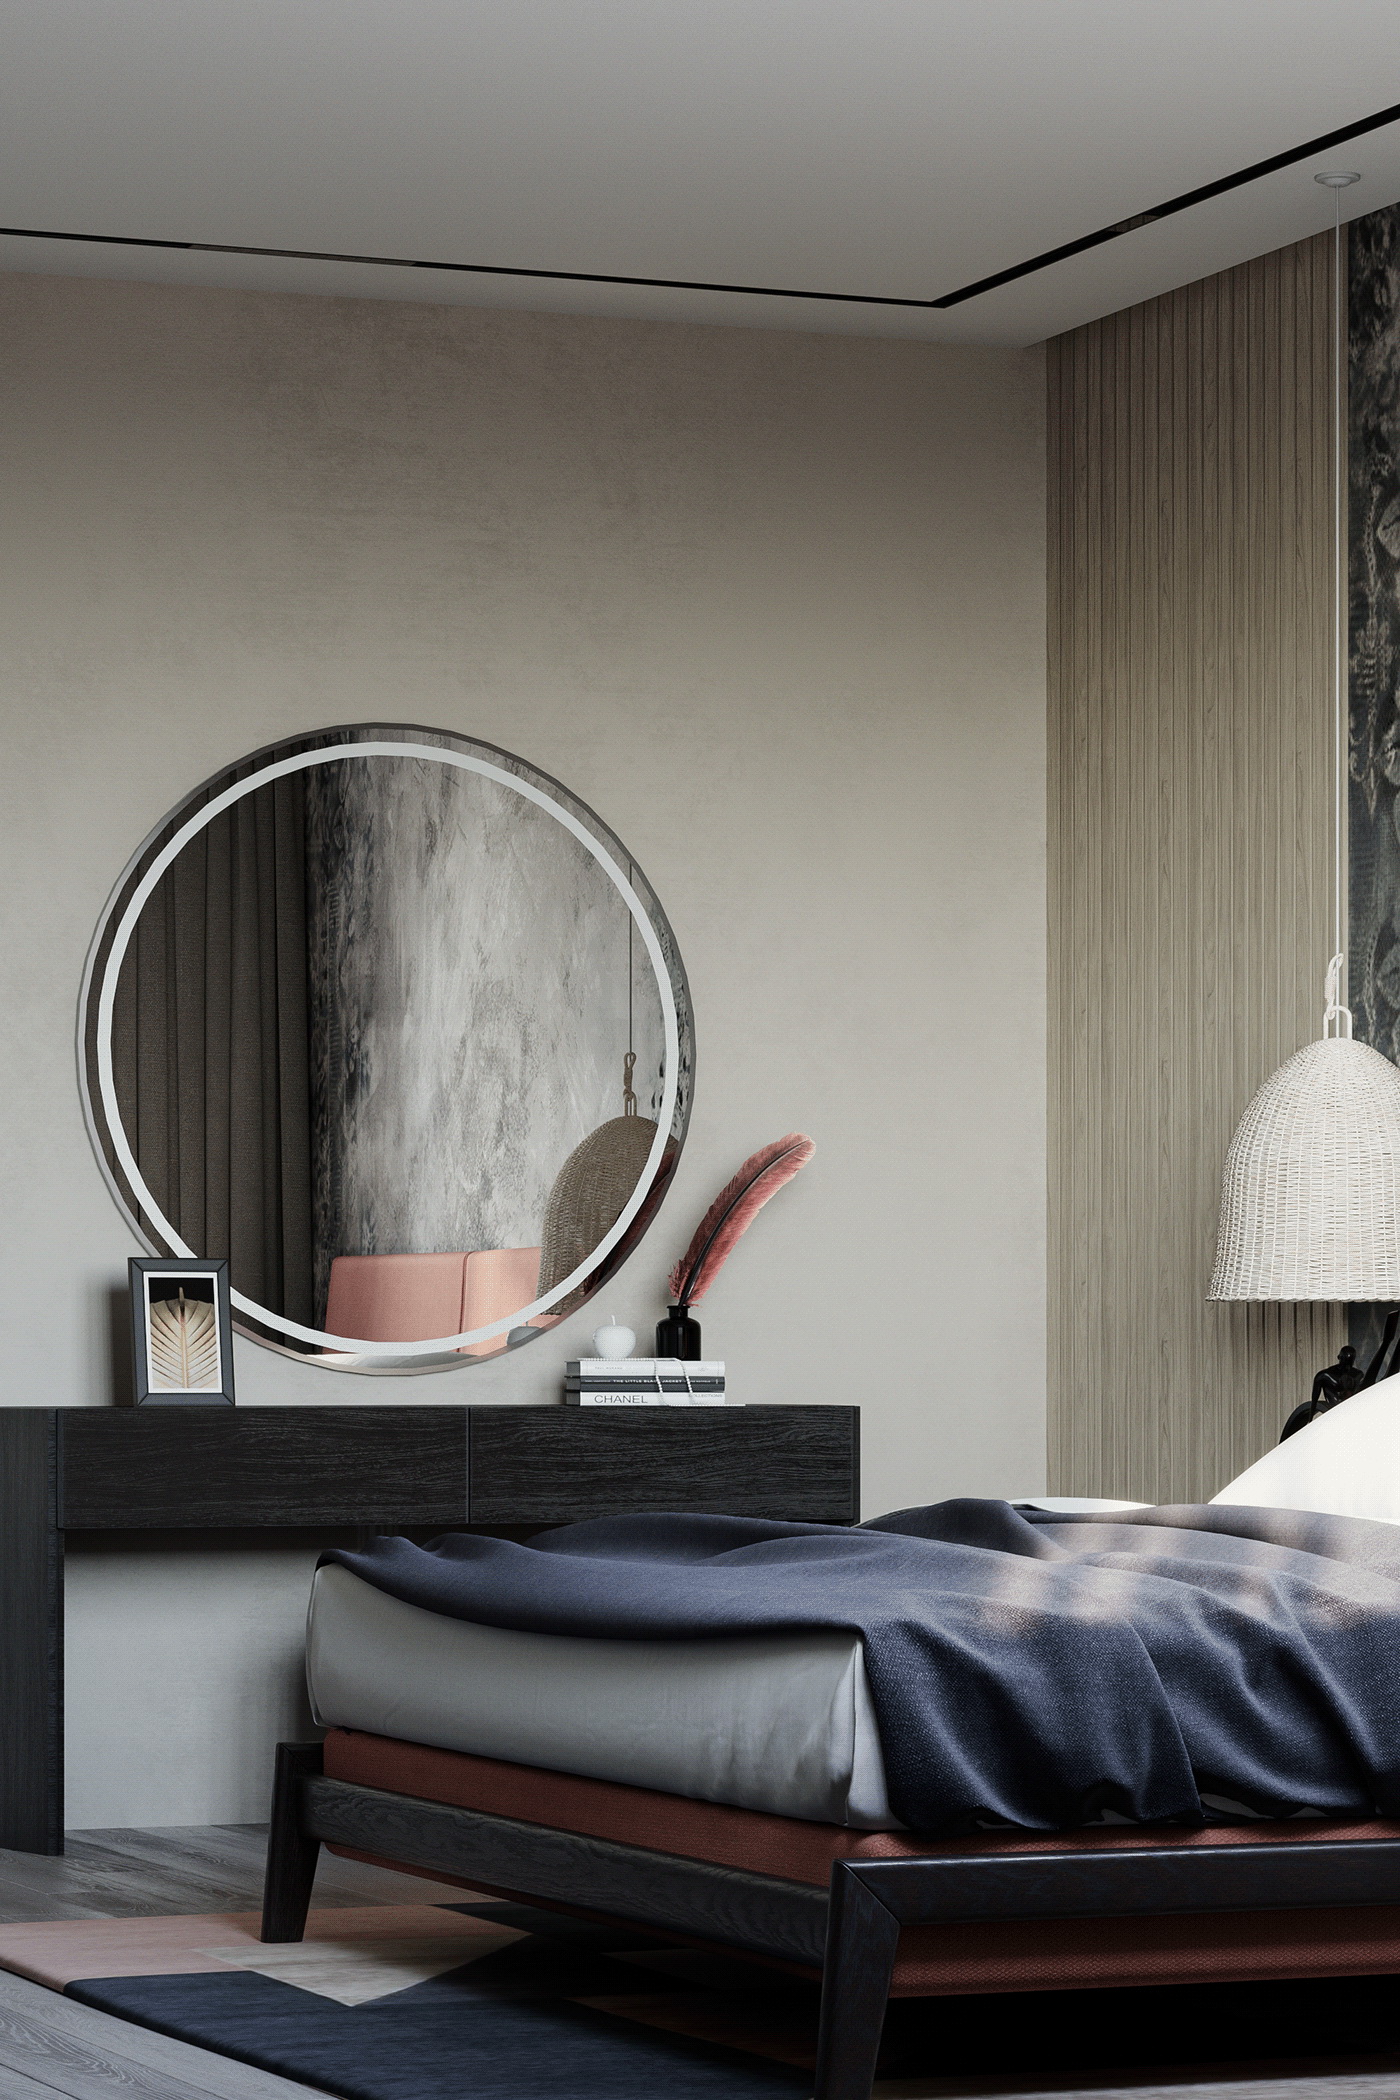 The round wall mirror brings a gentle beauty to the makeup corner.